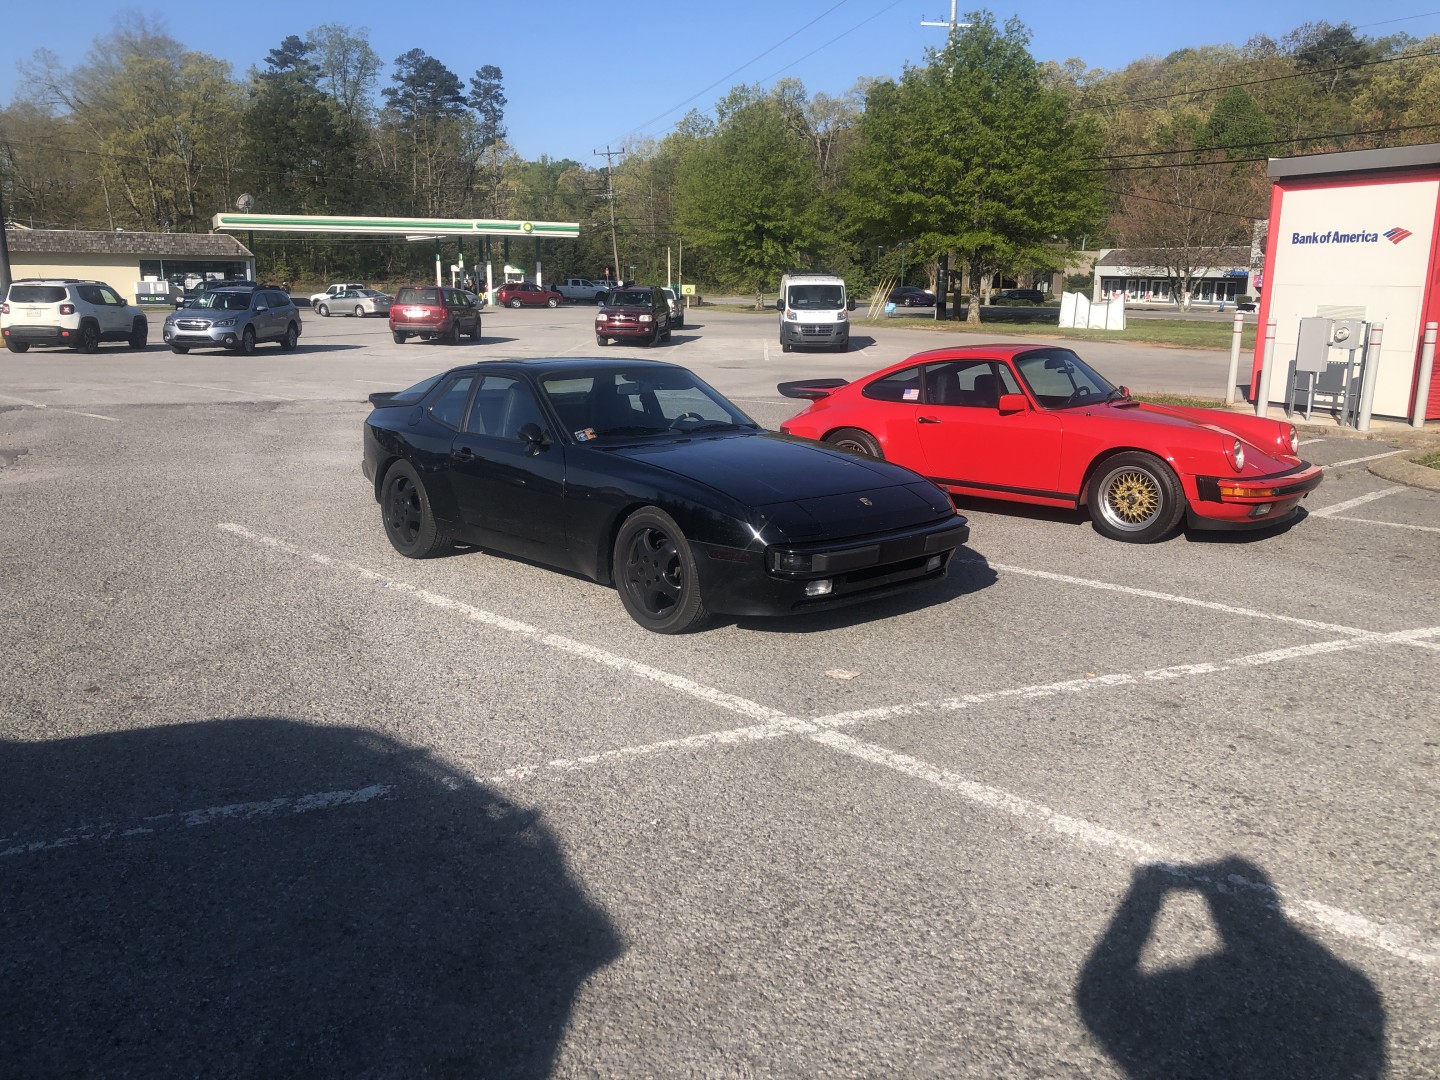 Found a friend at the grocery store. 